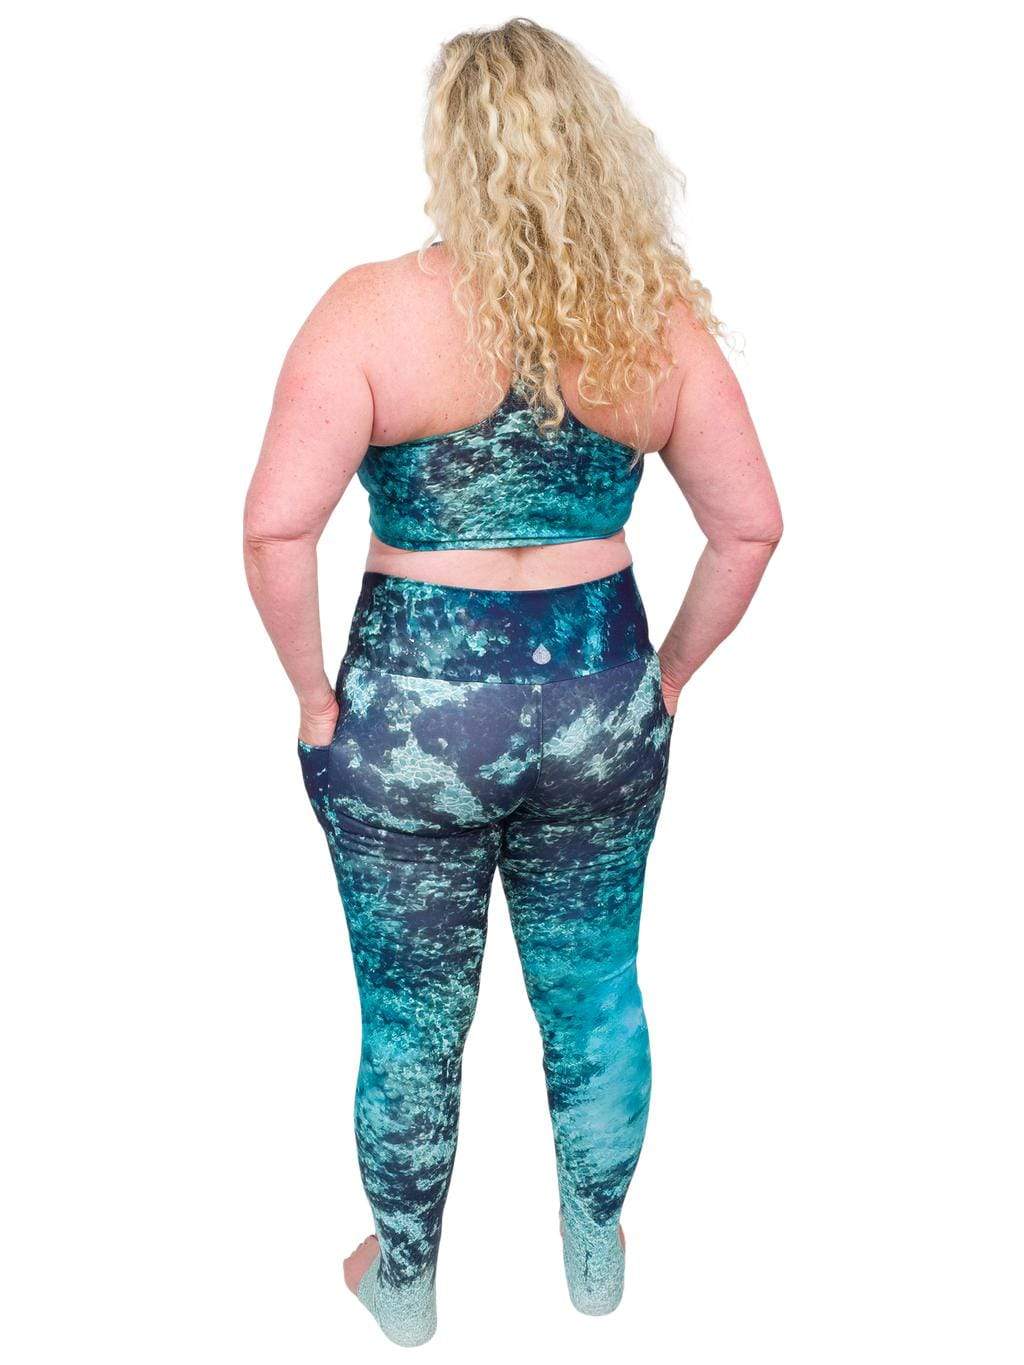 Model: Ruth volunteers for citizen science projects on both salt and freshwater fish and spends as much time as possible in, on, or under the water. She is 5&#39;7&quot;, 217 lbs, 40DD and is wearing a 2XL top and legging.